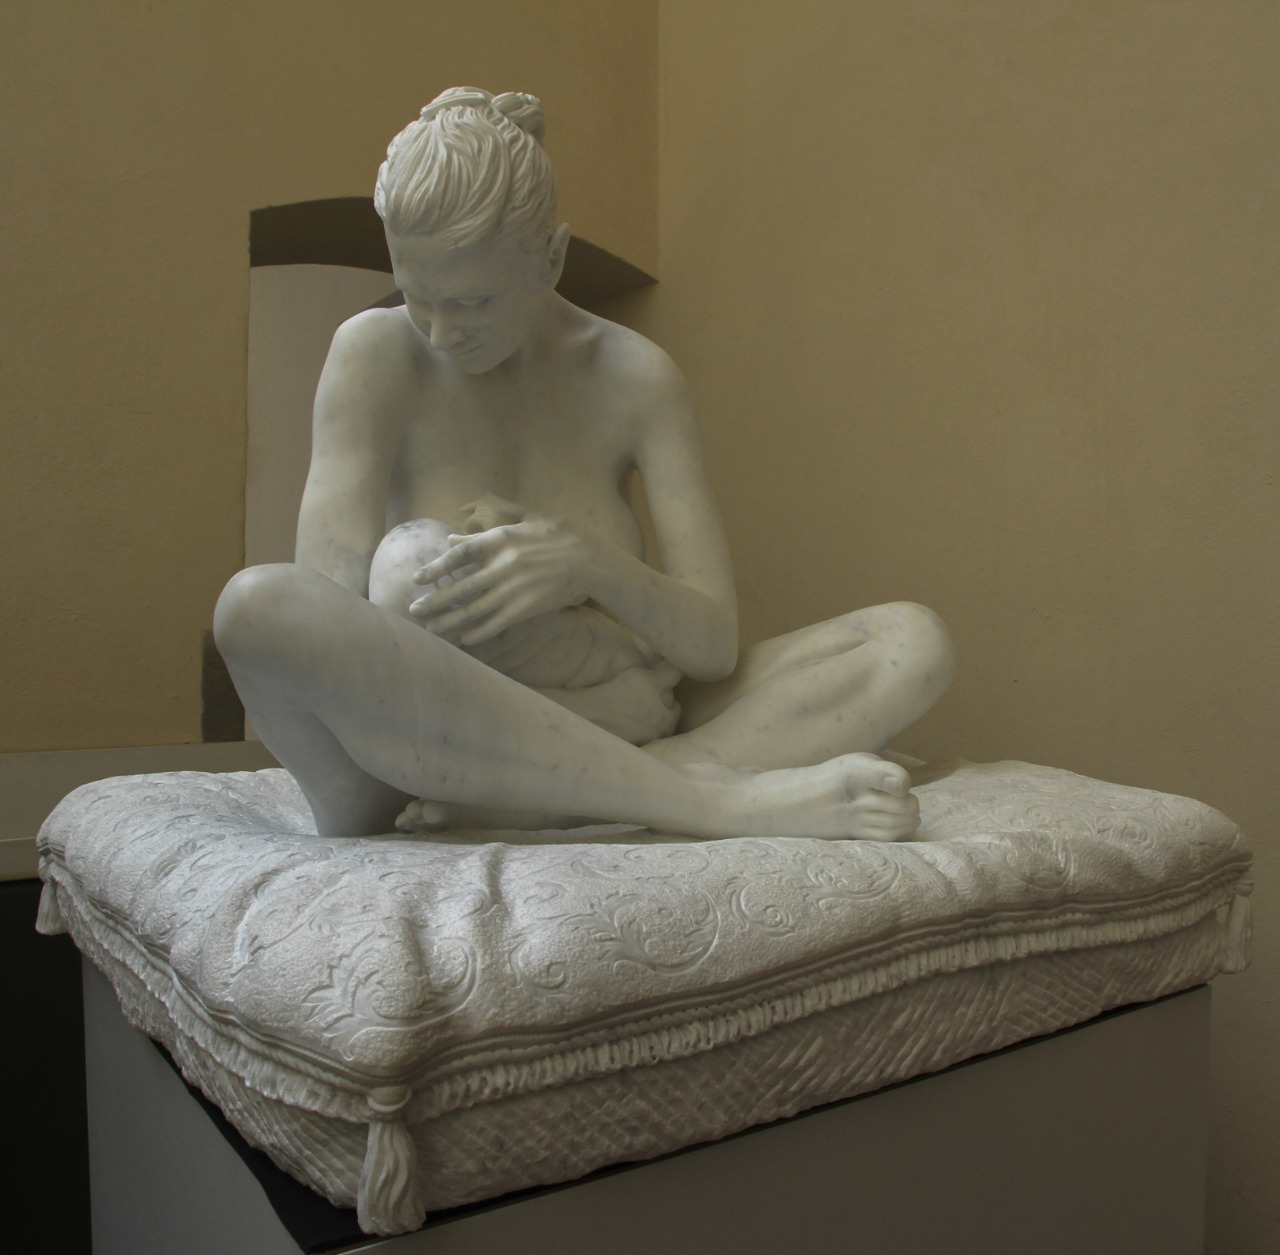 Mother & Child at Museo degli Innocenti, Florence